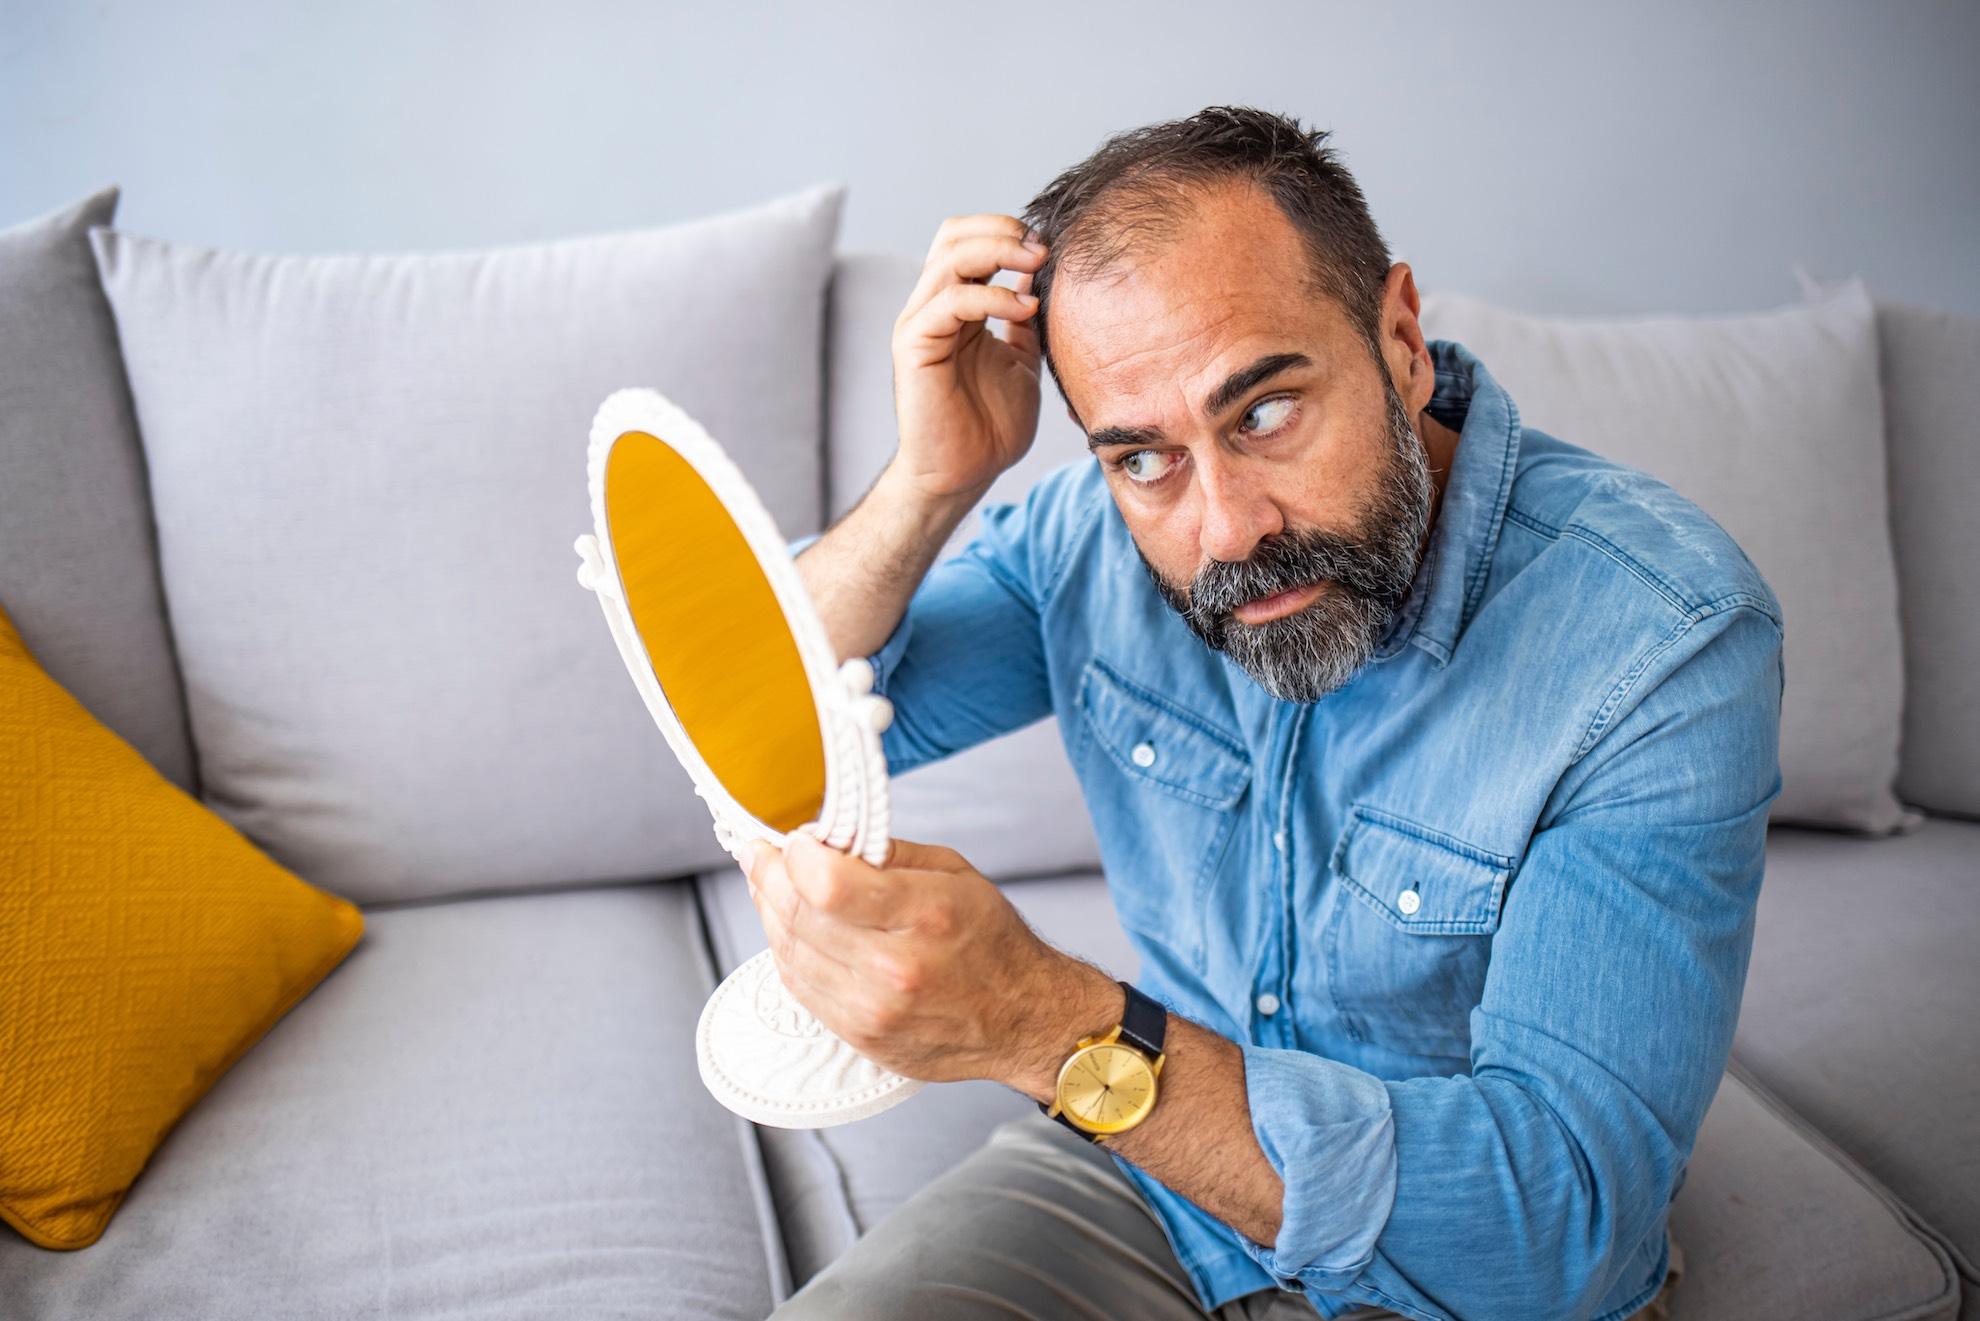 The Connection Between Hair Loss and Weight Loss